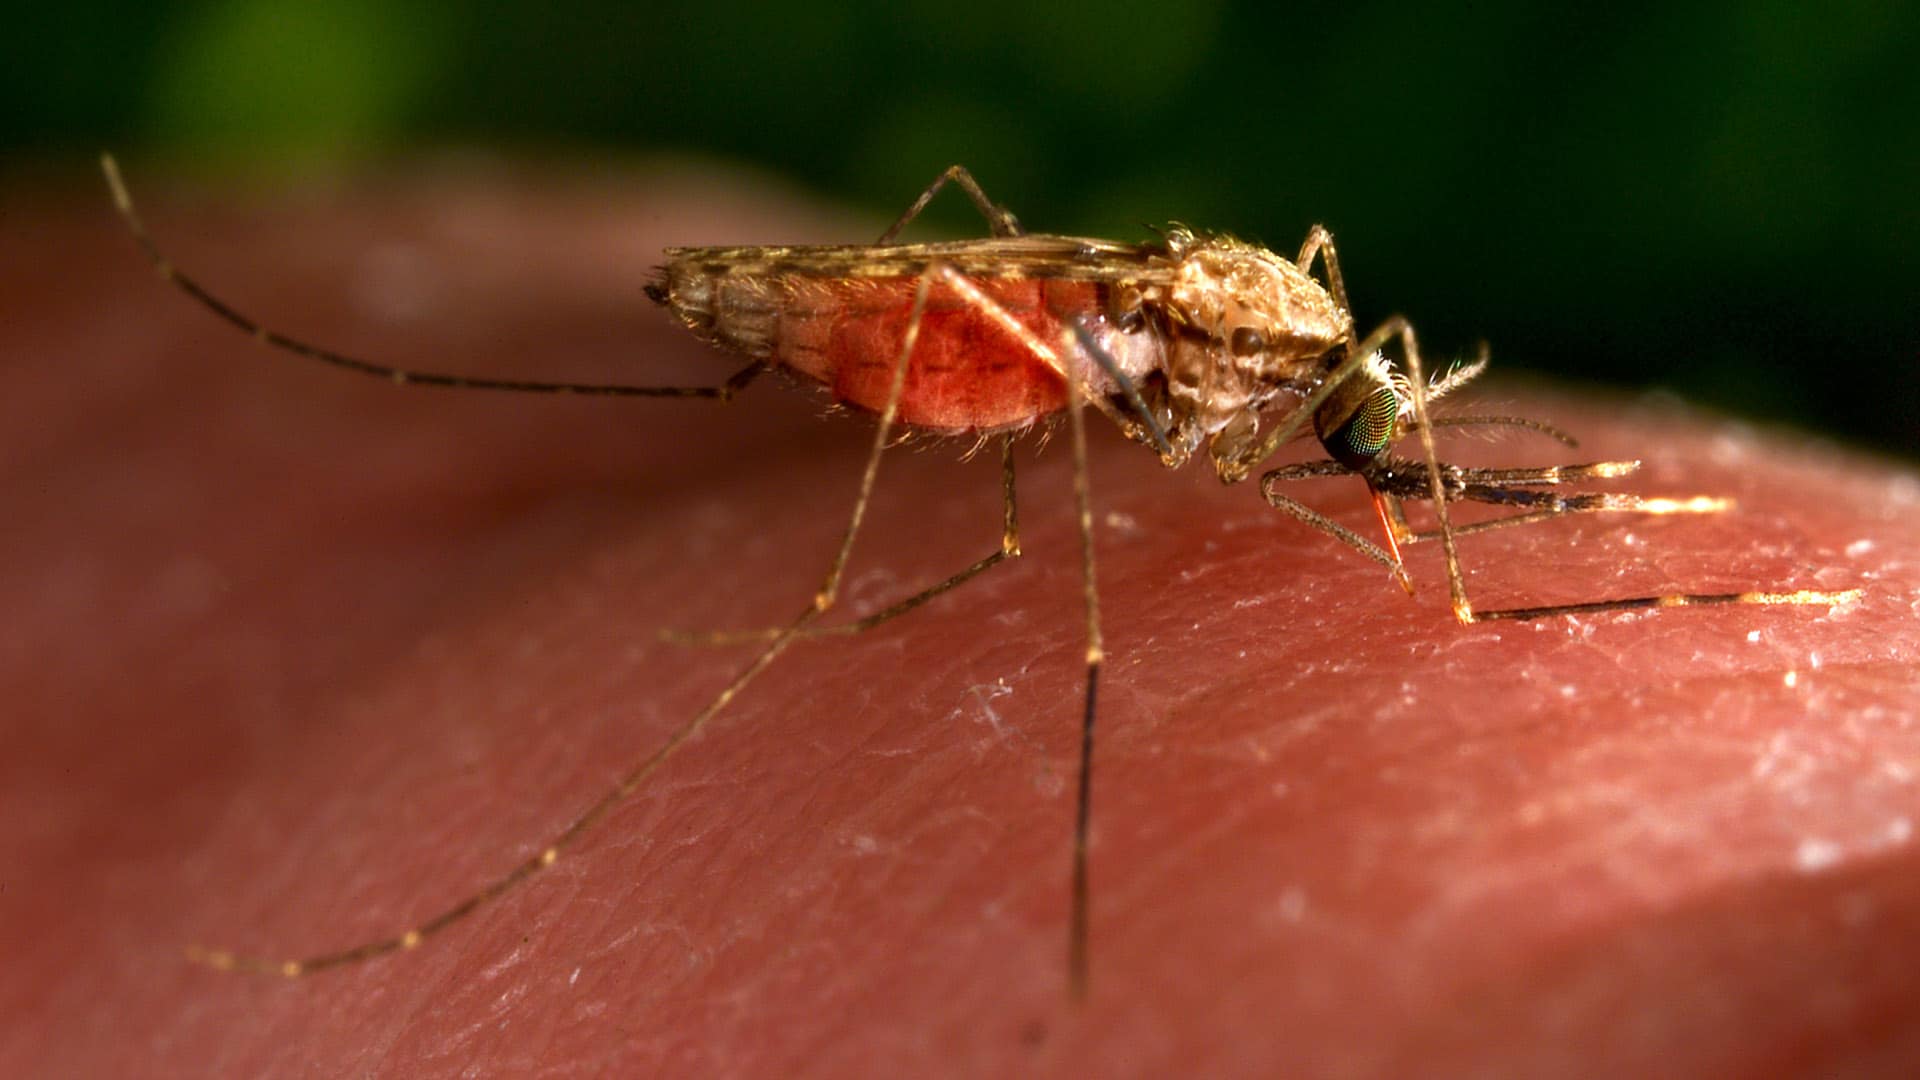 An Anopheles gambiae mosquito taking a blood meal.